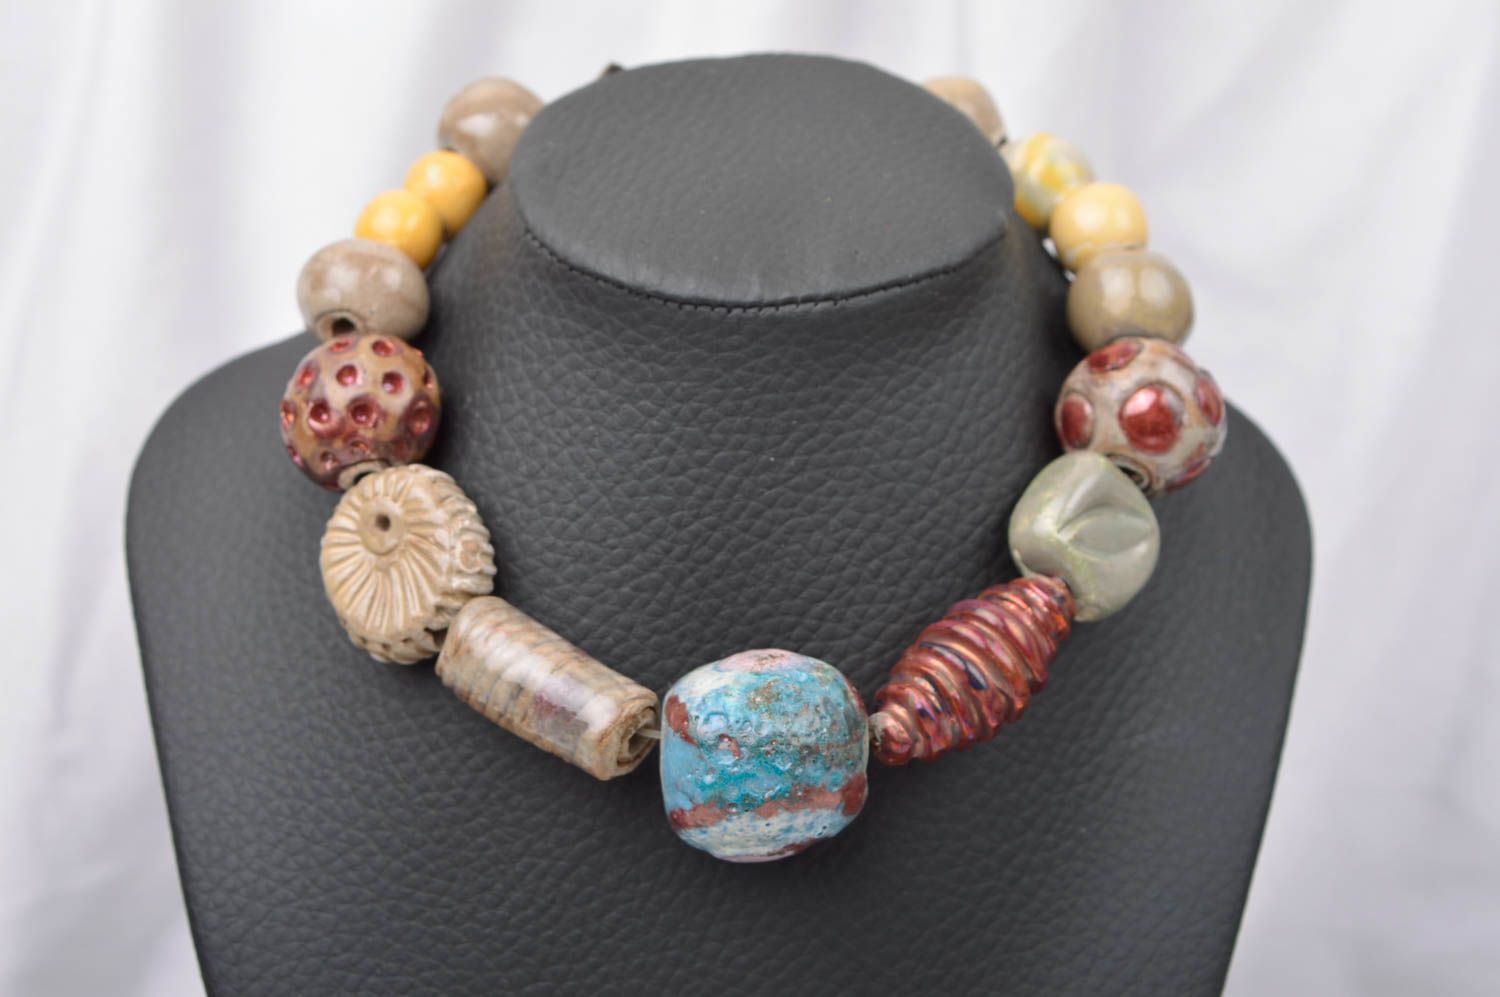 Beautiful handmade ceramic necklace bead necklace fashion tips cool jewelry photo 1